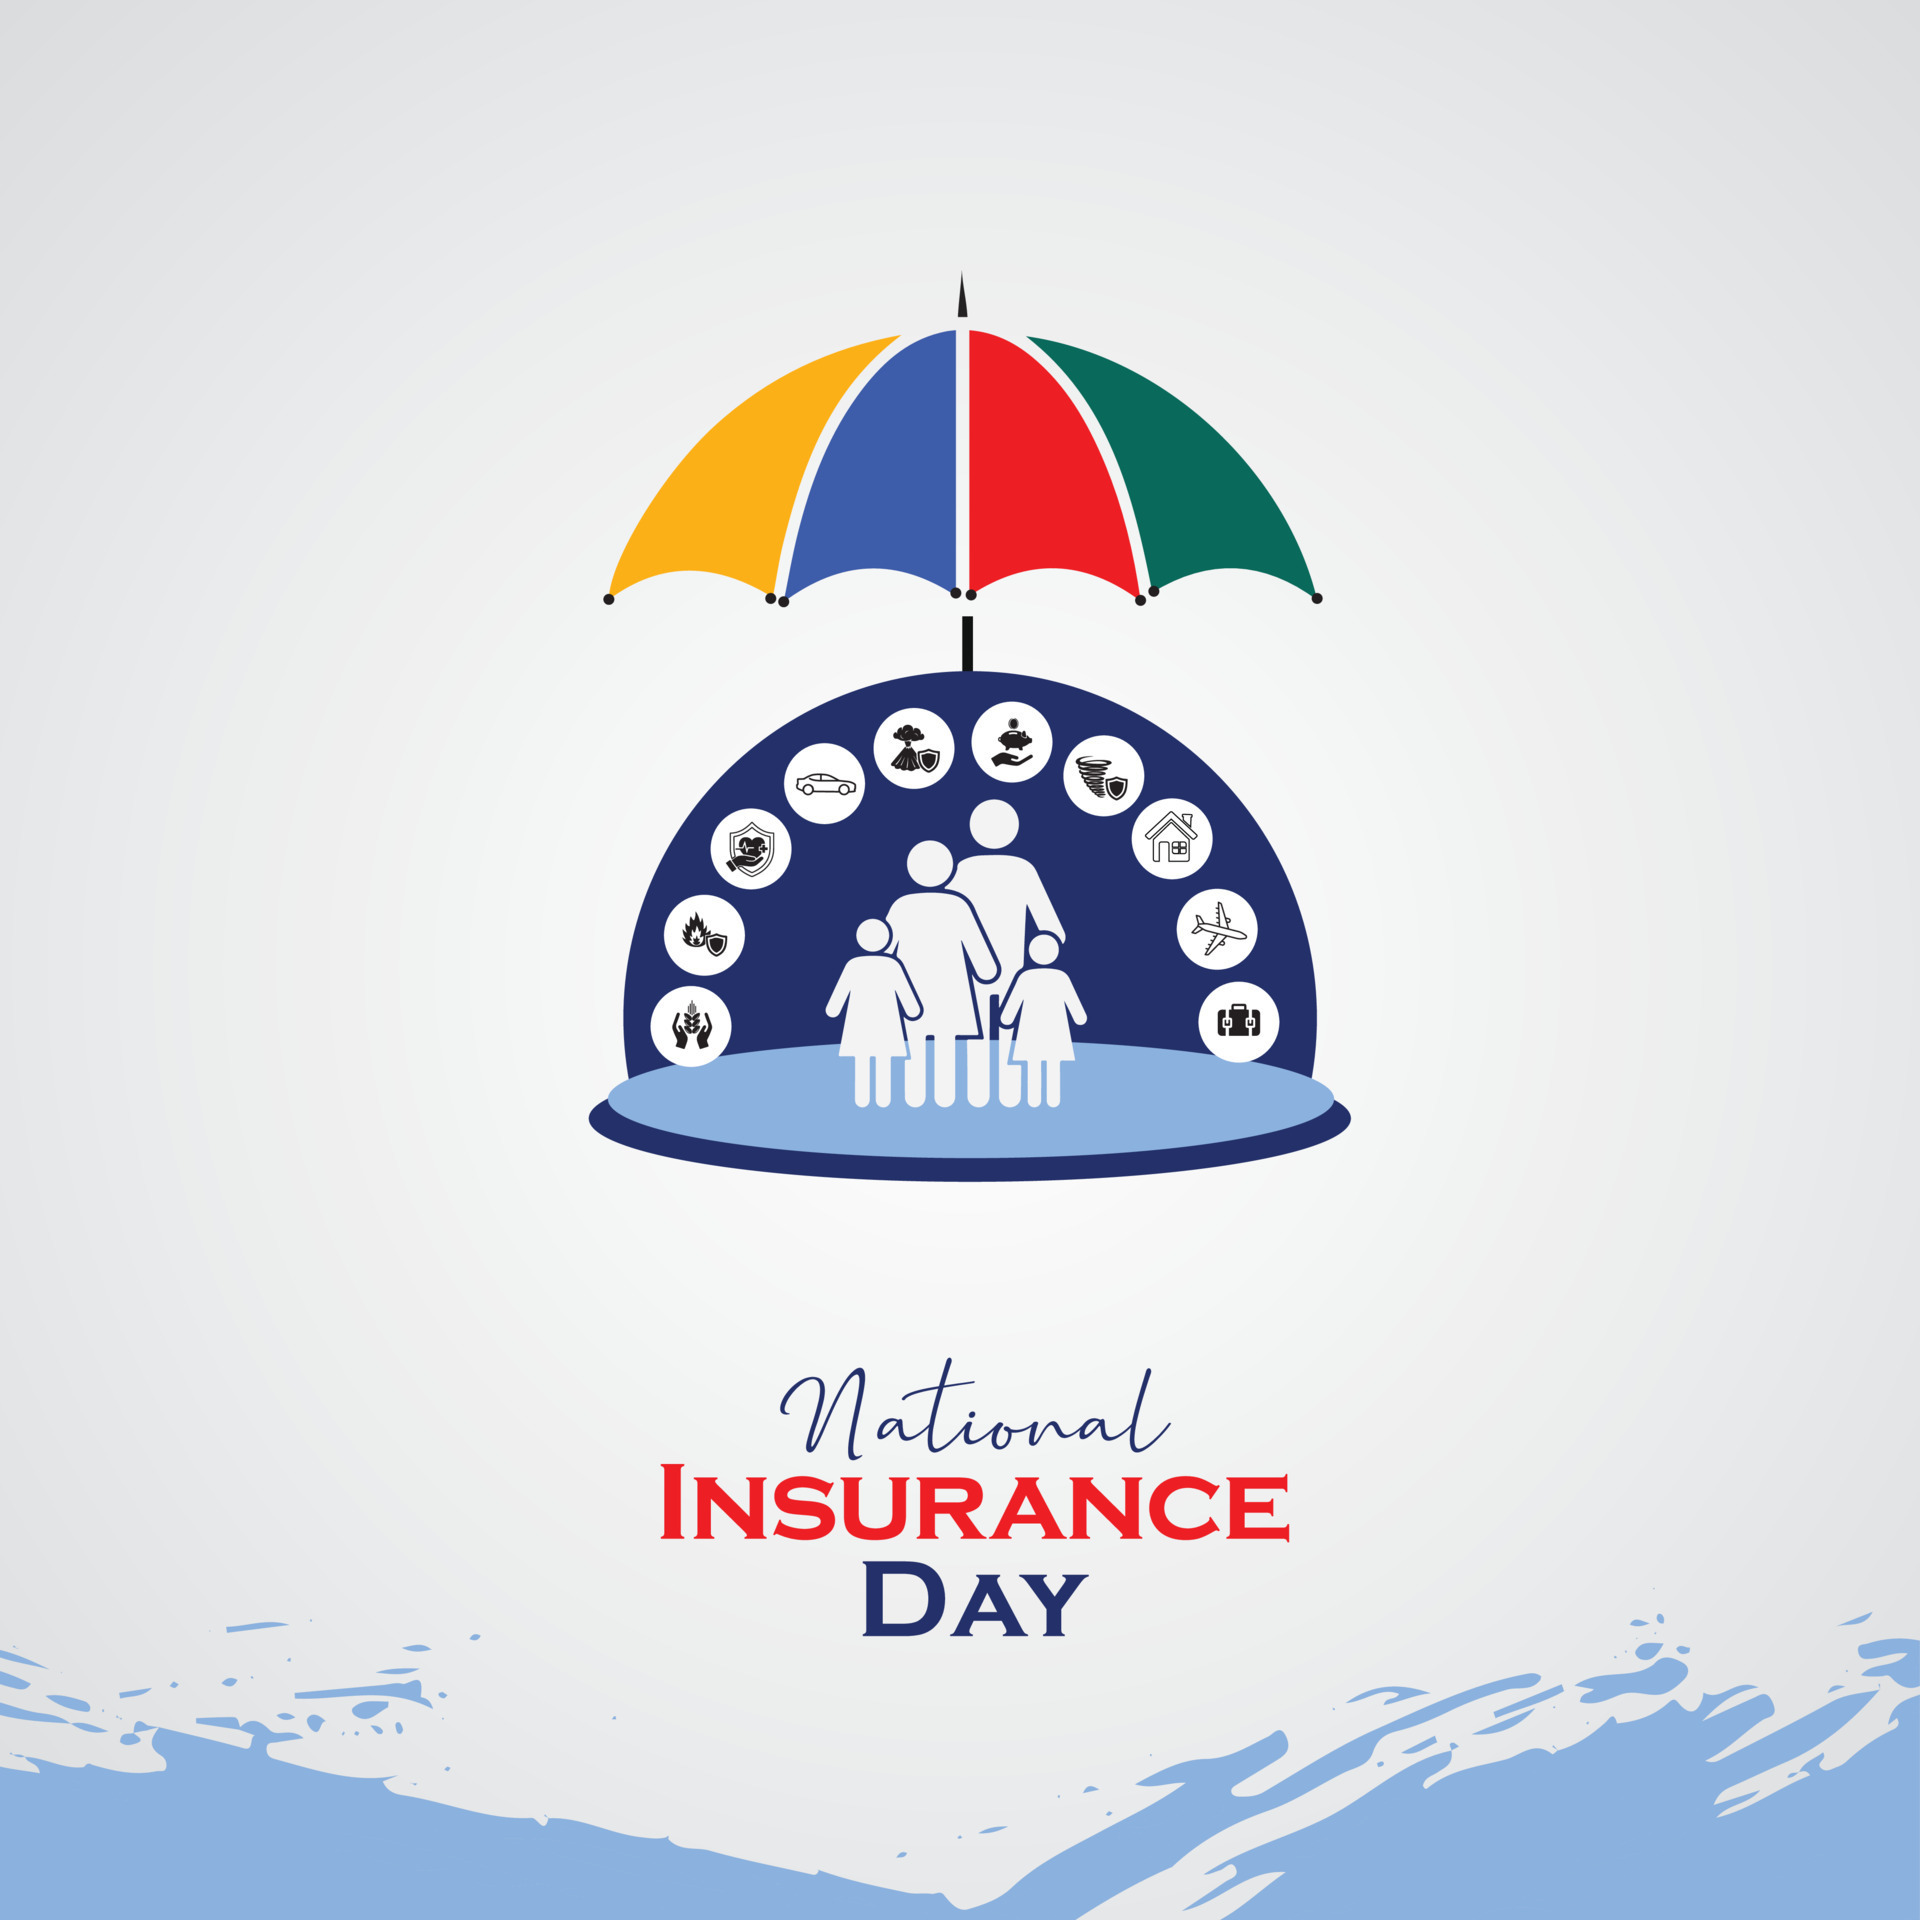 National Insurance Day. Insurance Awareness Day Holiday concept